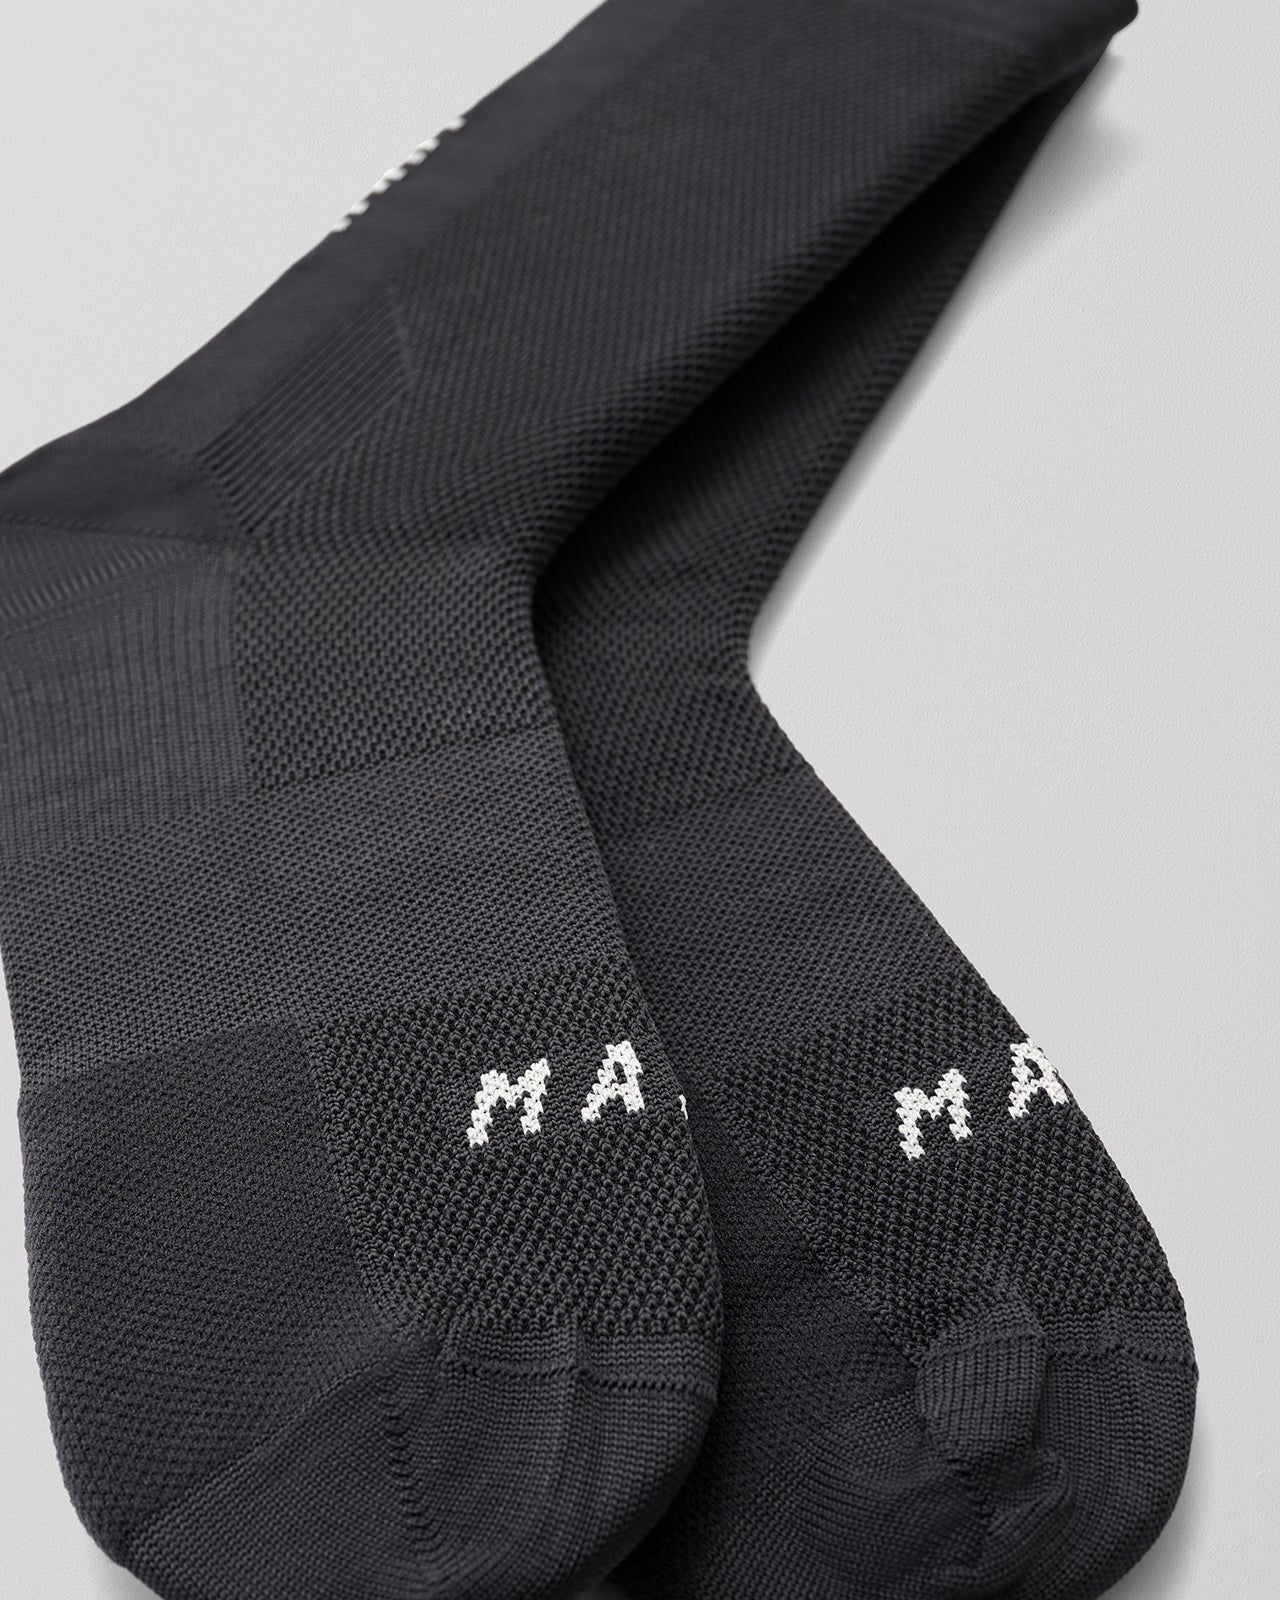 MAAP Division Sock - Muscat exclusive at Enroute.cc